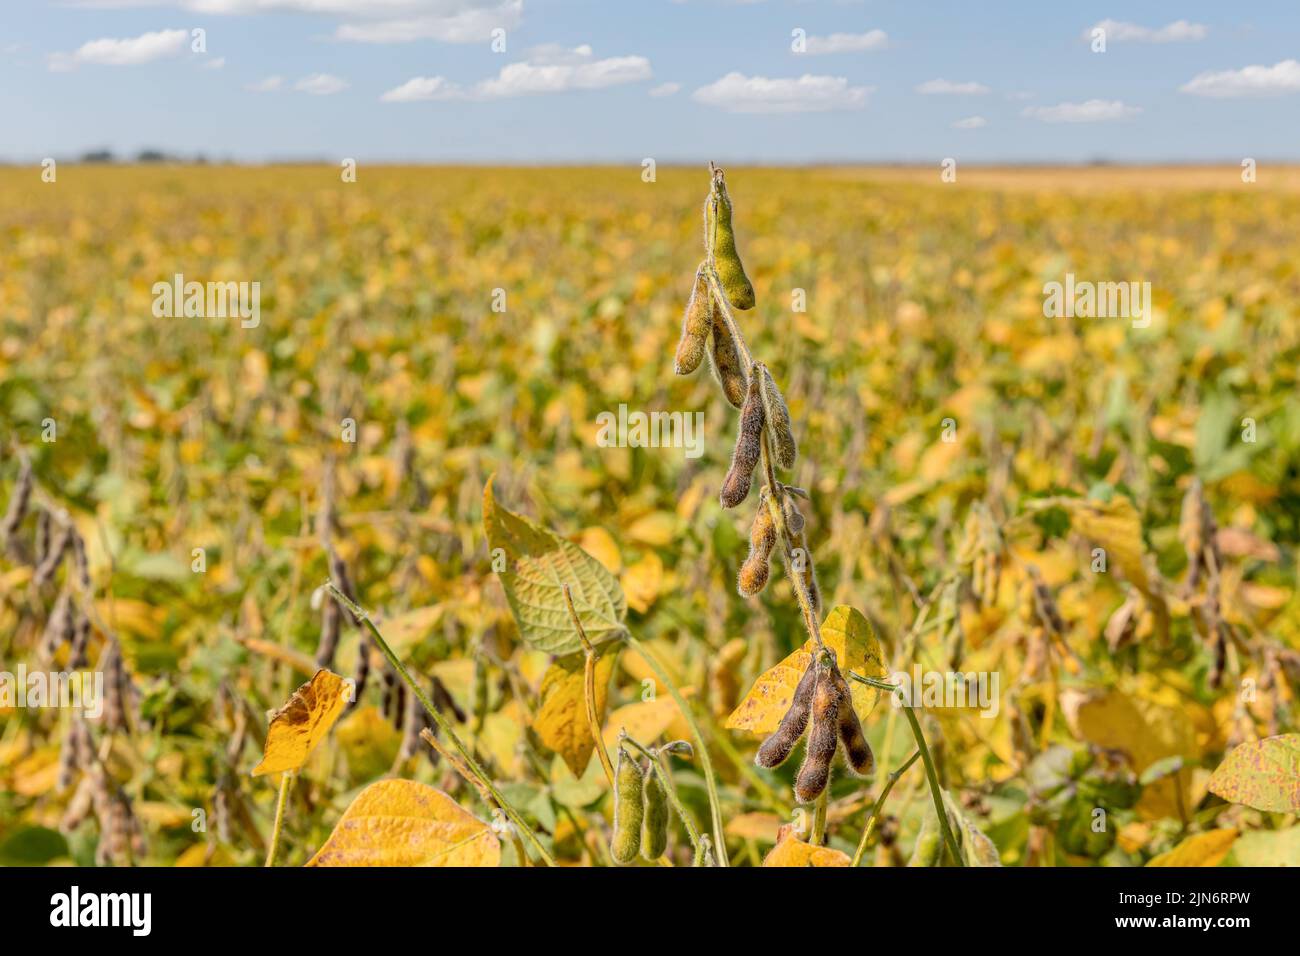 Soybean field with leaves turning colors in autumn. Farming landscape, harvest season and agriculture concept Stock Photo